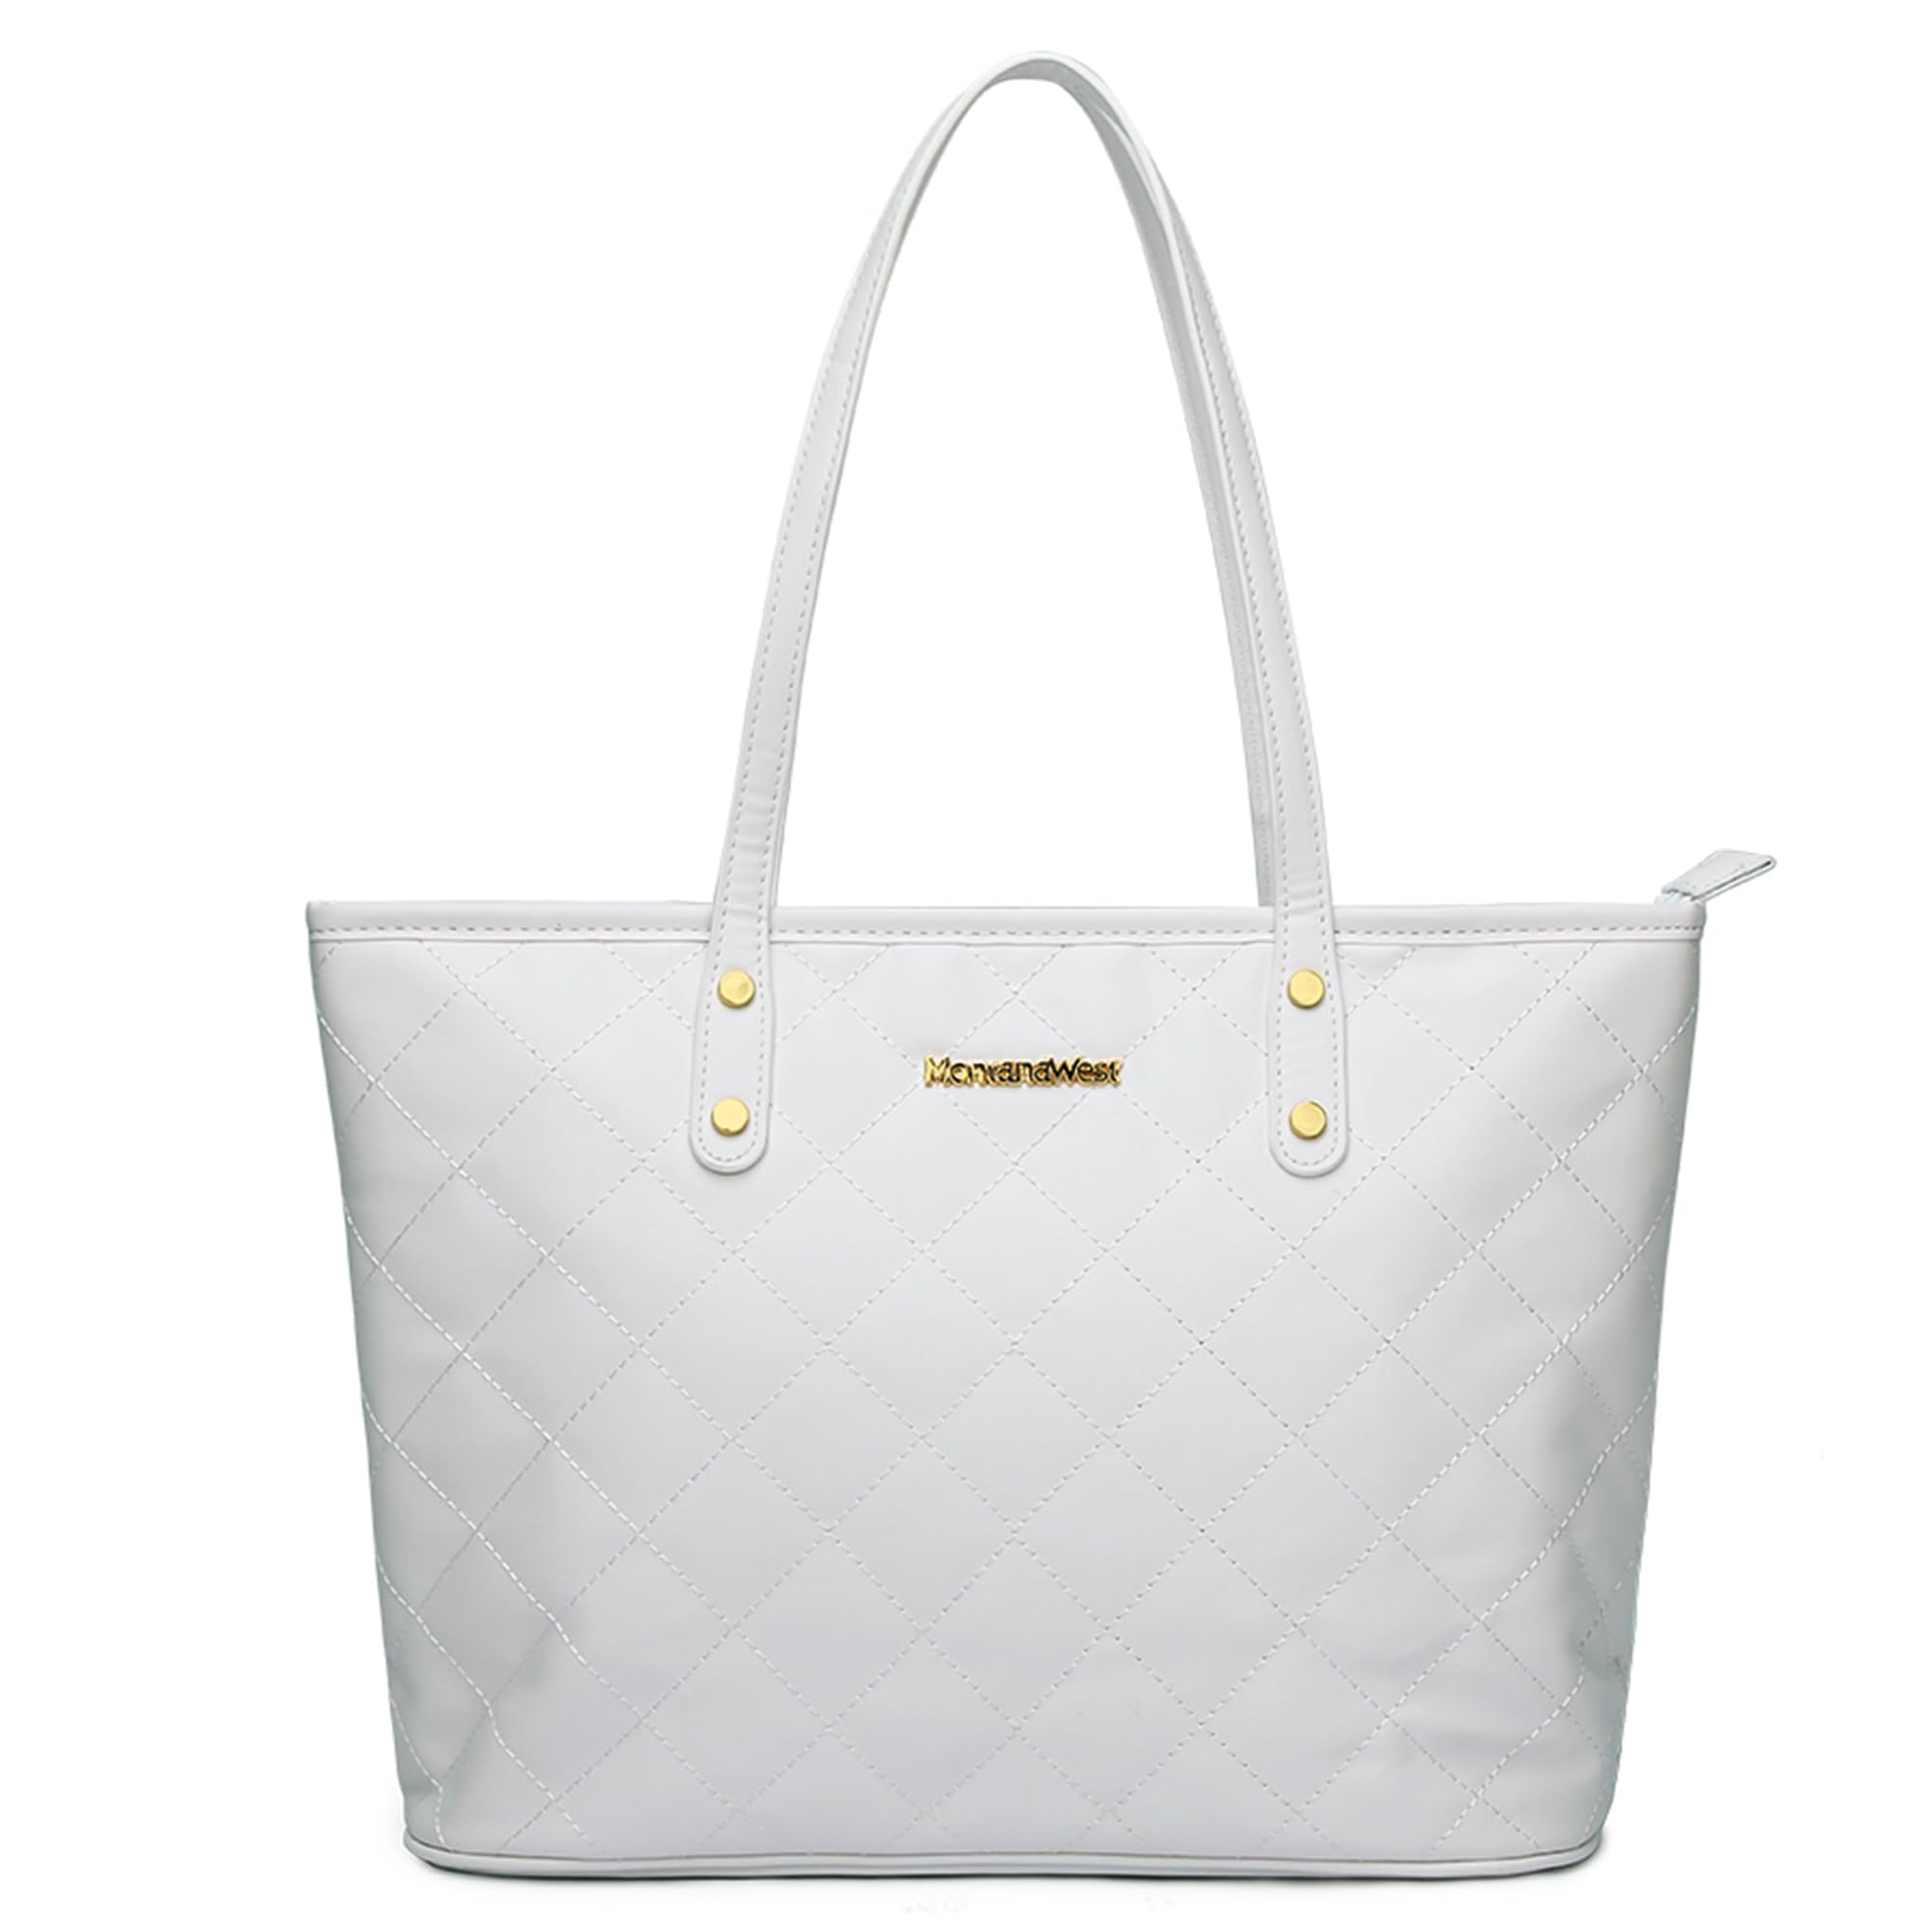 Montana West Women's Quilted Handbag (Various Colors) $9 + Free Shipping w/ Prime or $35+